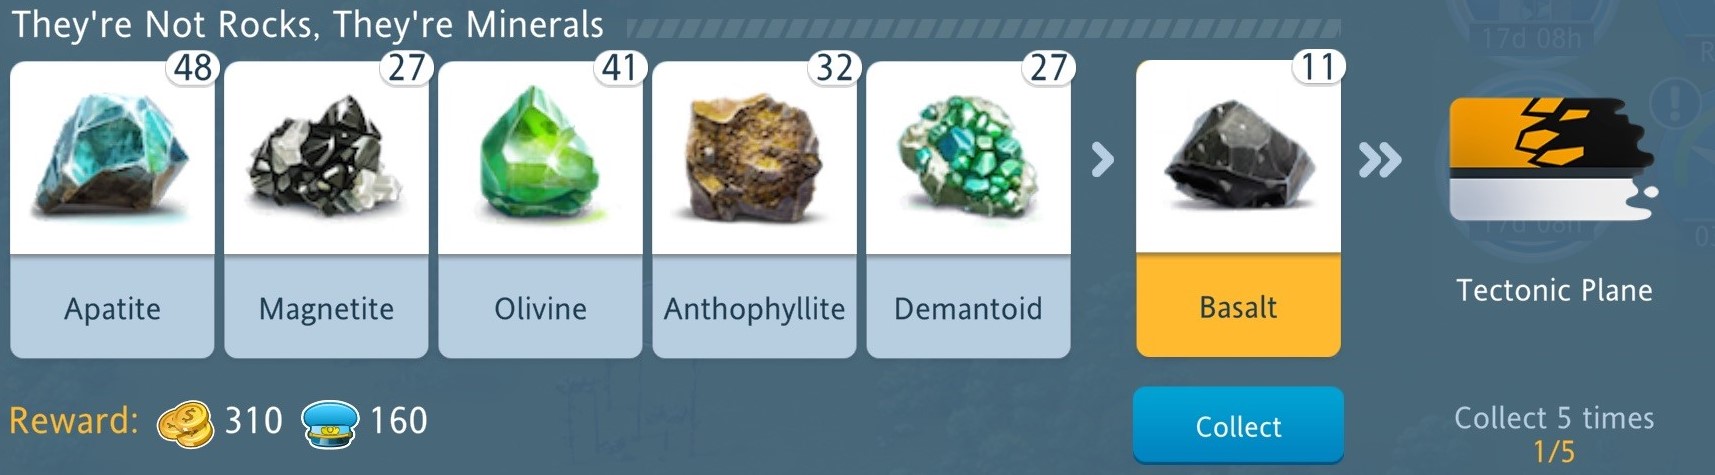 theyre not rocks theyre minerals.jpg